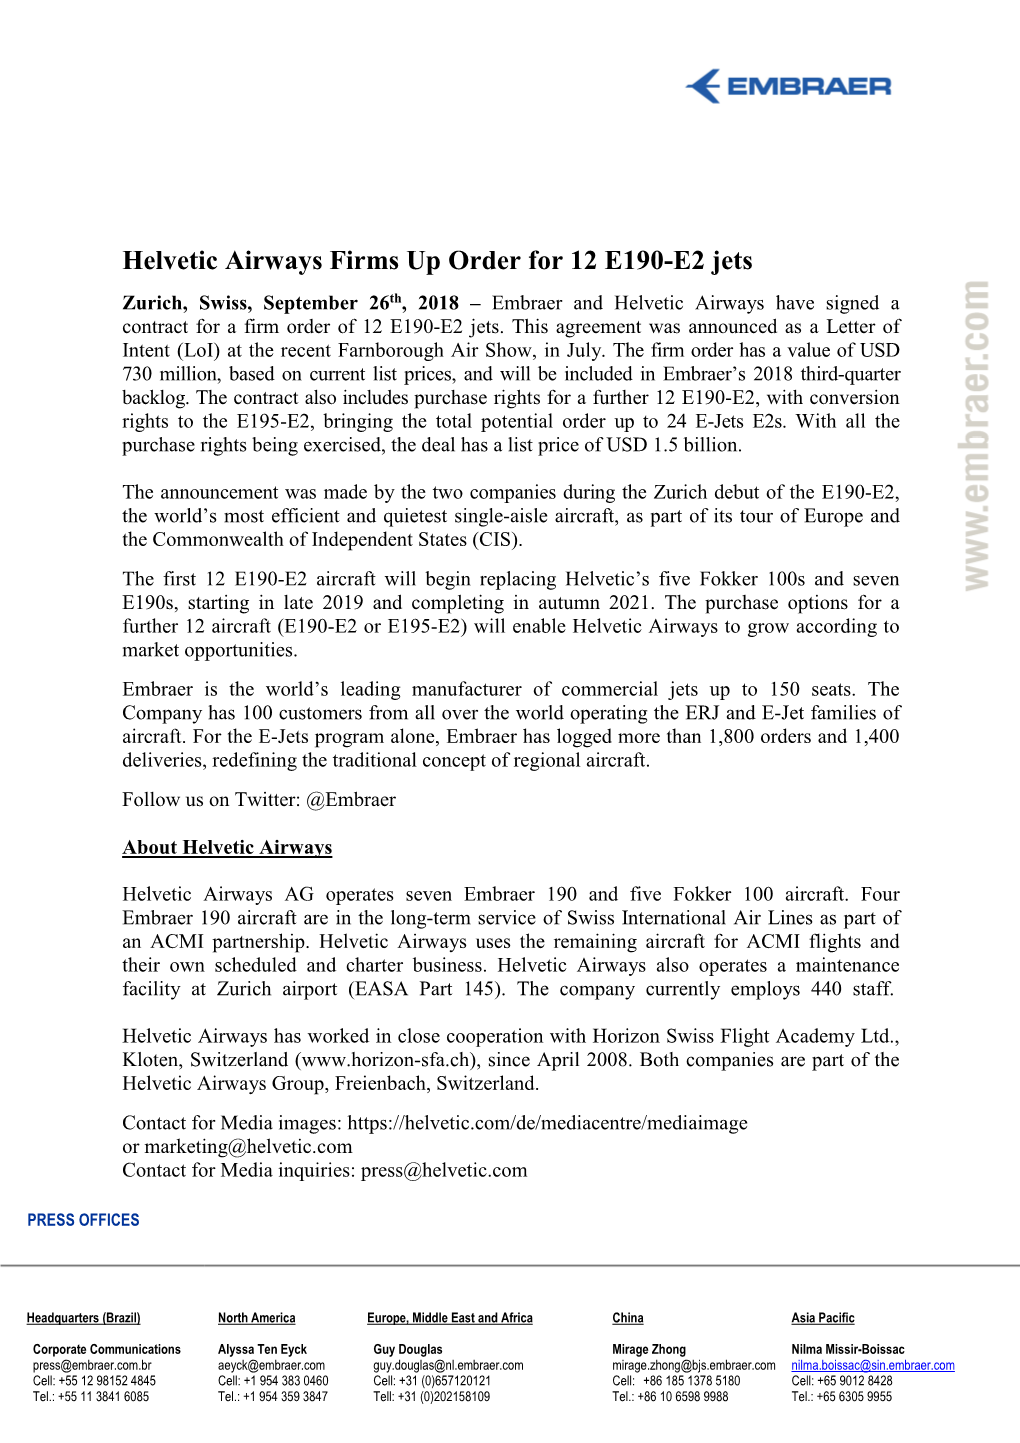 Helvetic Airways Firms up Order for 12 E190-E2 Jets